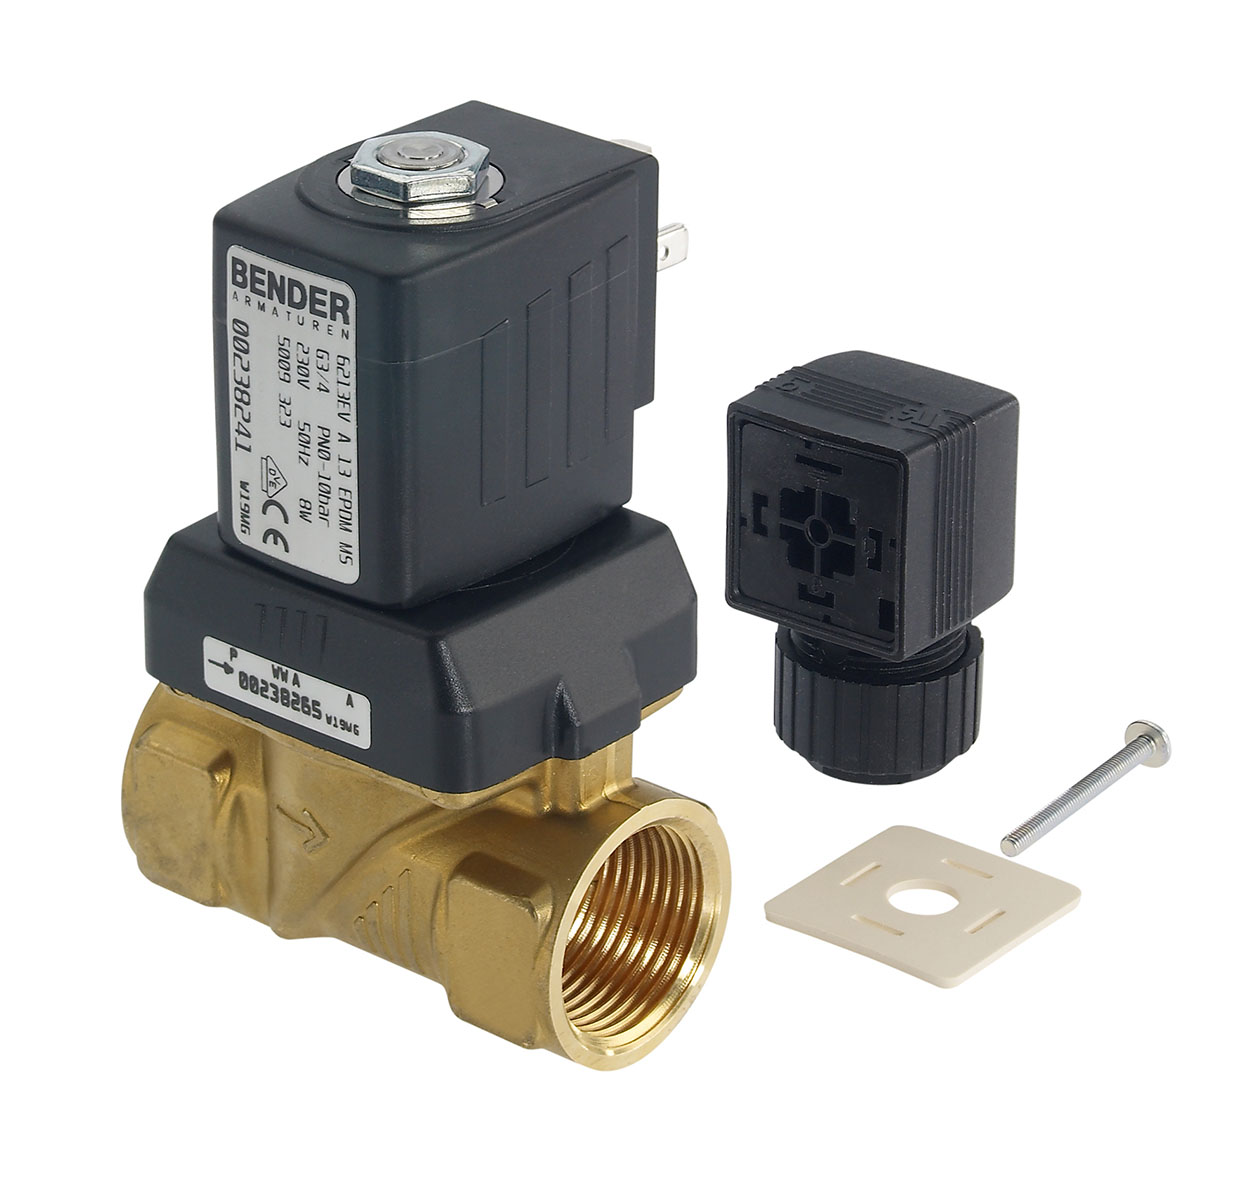 5009310 - 2/2 way solenoidvalve normally closed for fluids Type 1; female thread